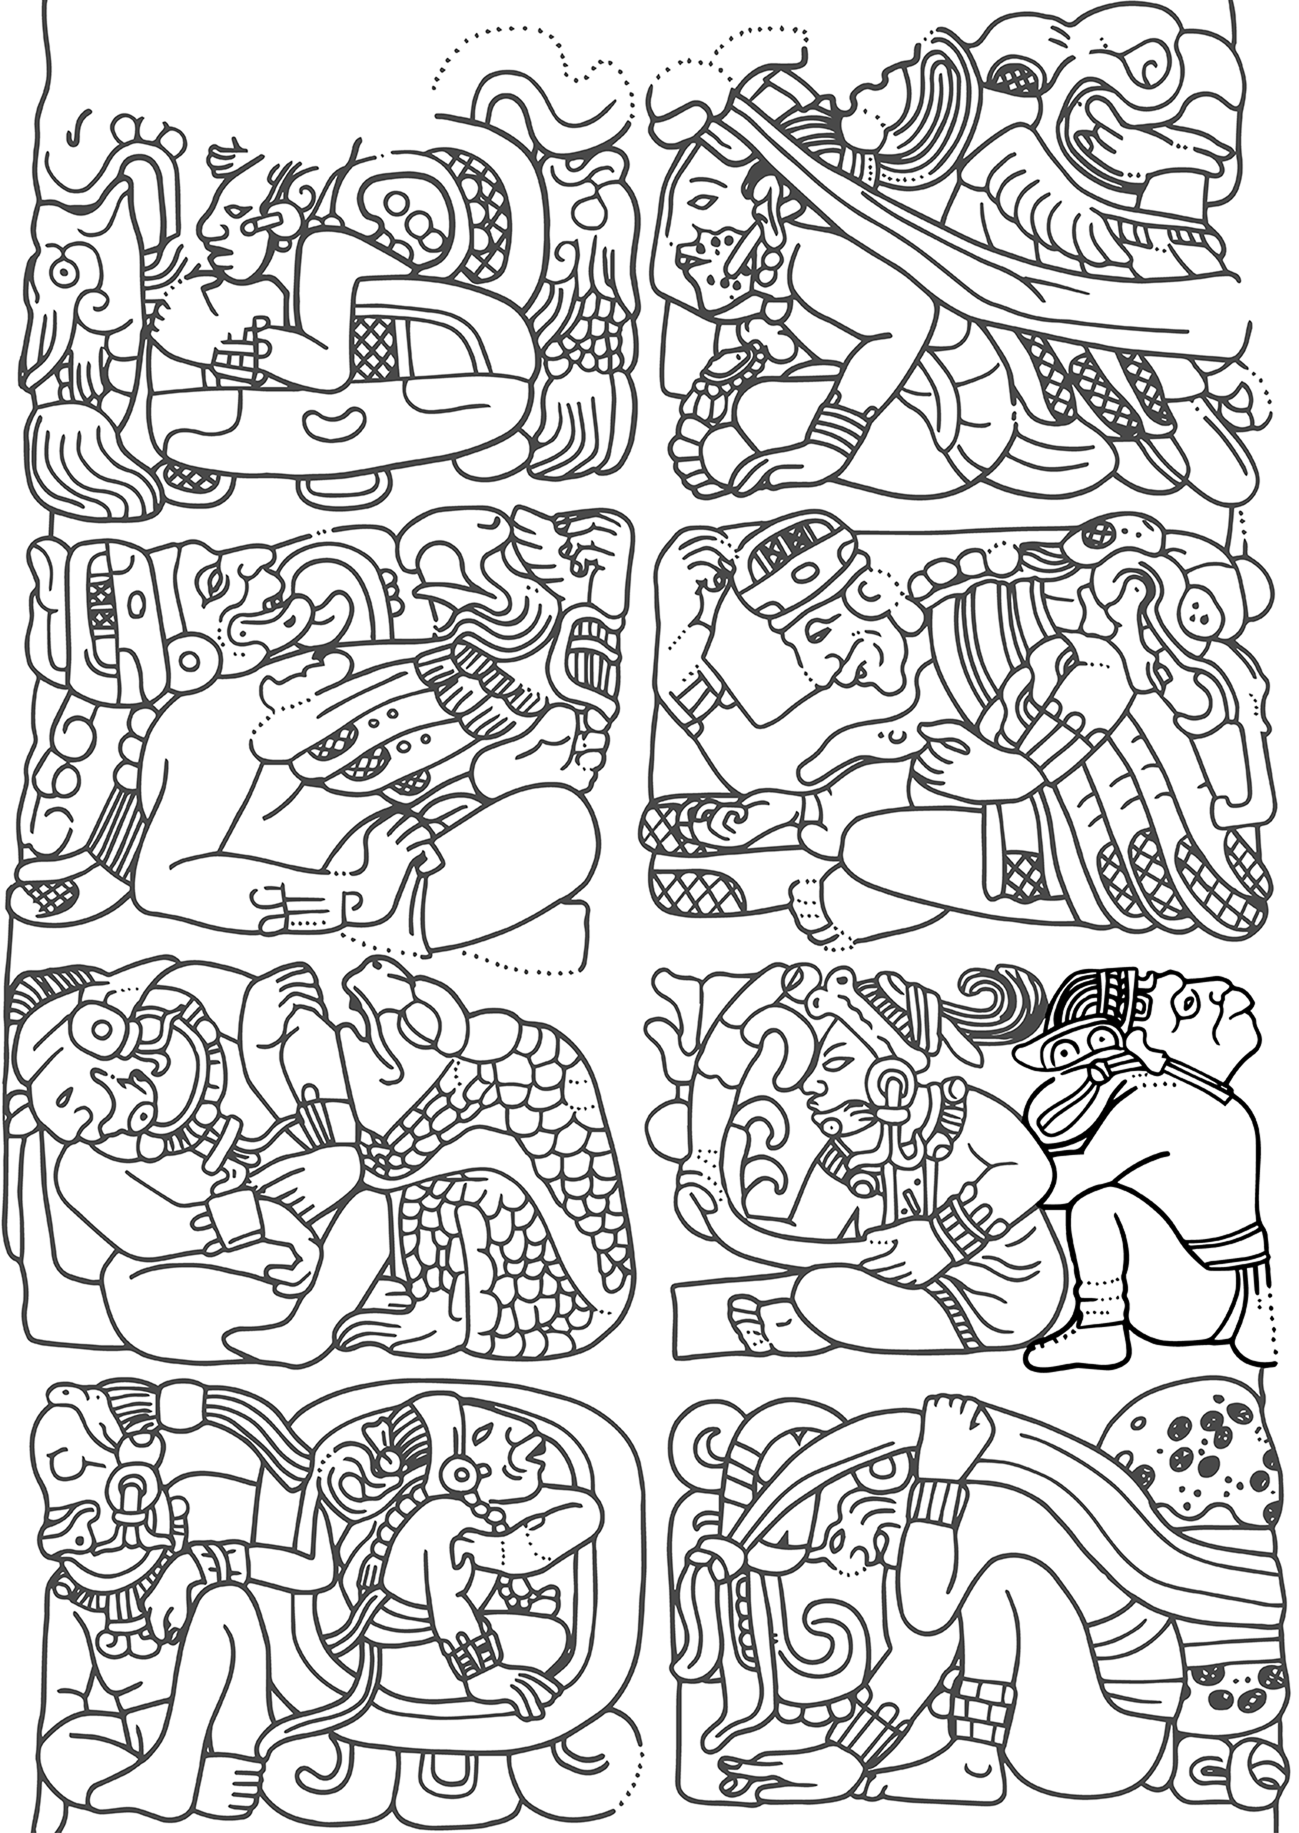 Cultures of creativity hieroglyphic innovation in the classic maya lowlands archaeological journal core